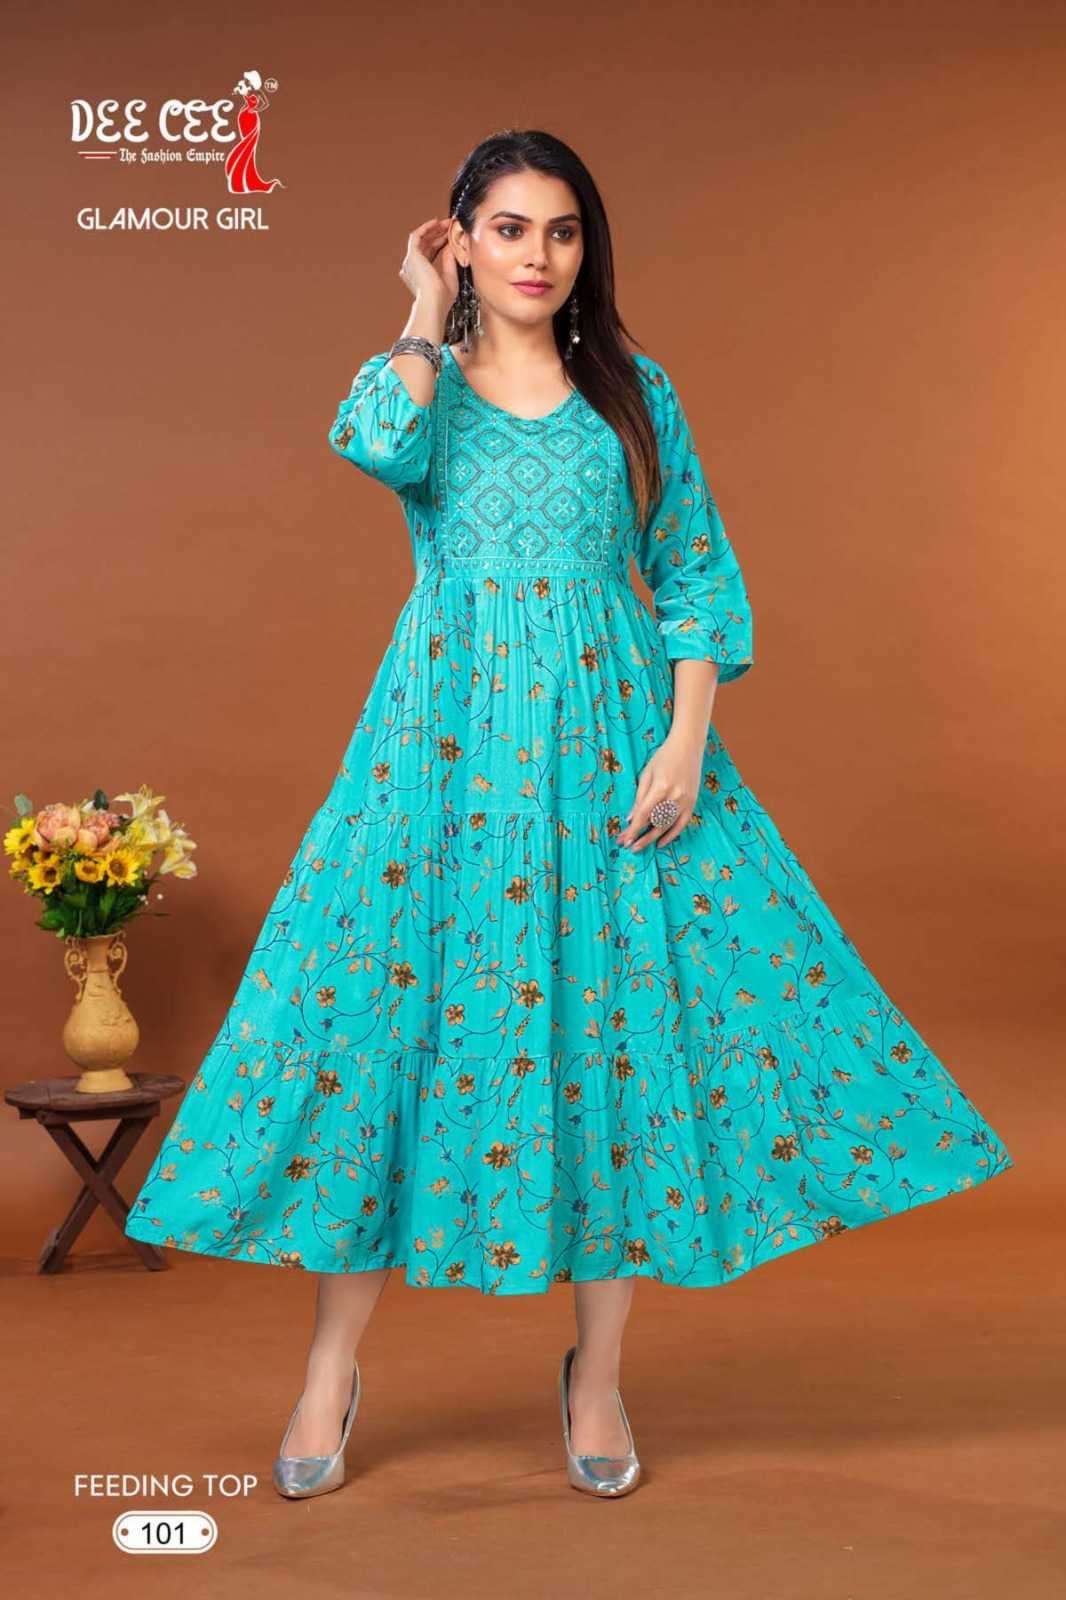 dee cee glamour girl fancy Flower Printed Fedding Kurti collection at ...